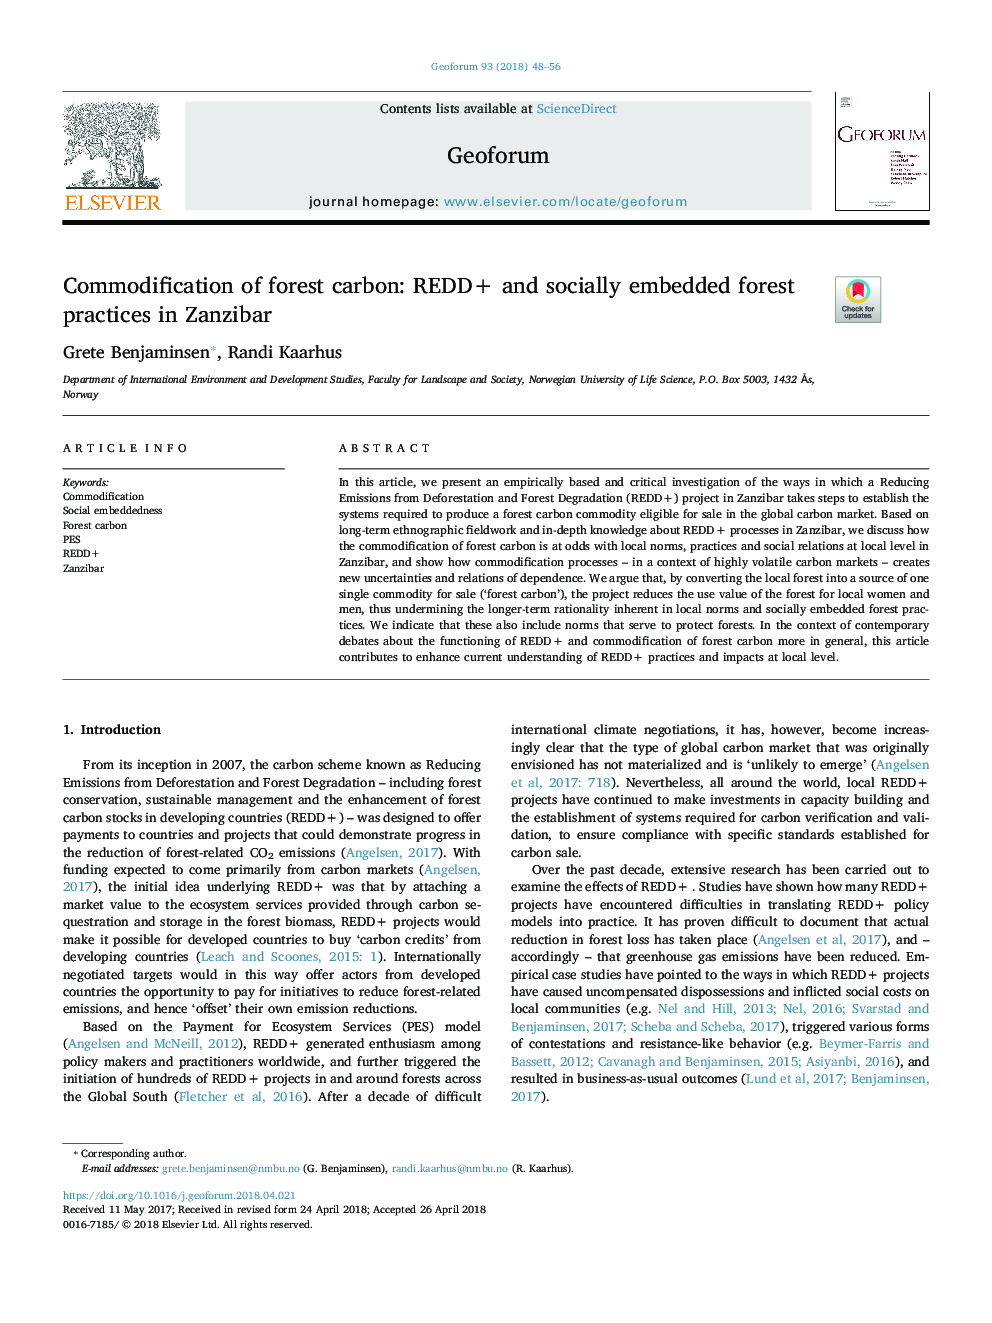 Commodification of forest carbon: REDD+ and socially embedded forest practices in Zanzibar